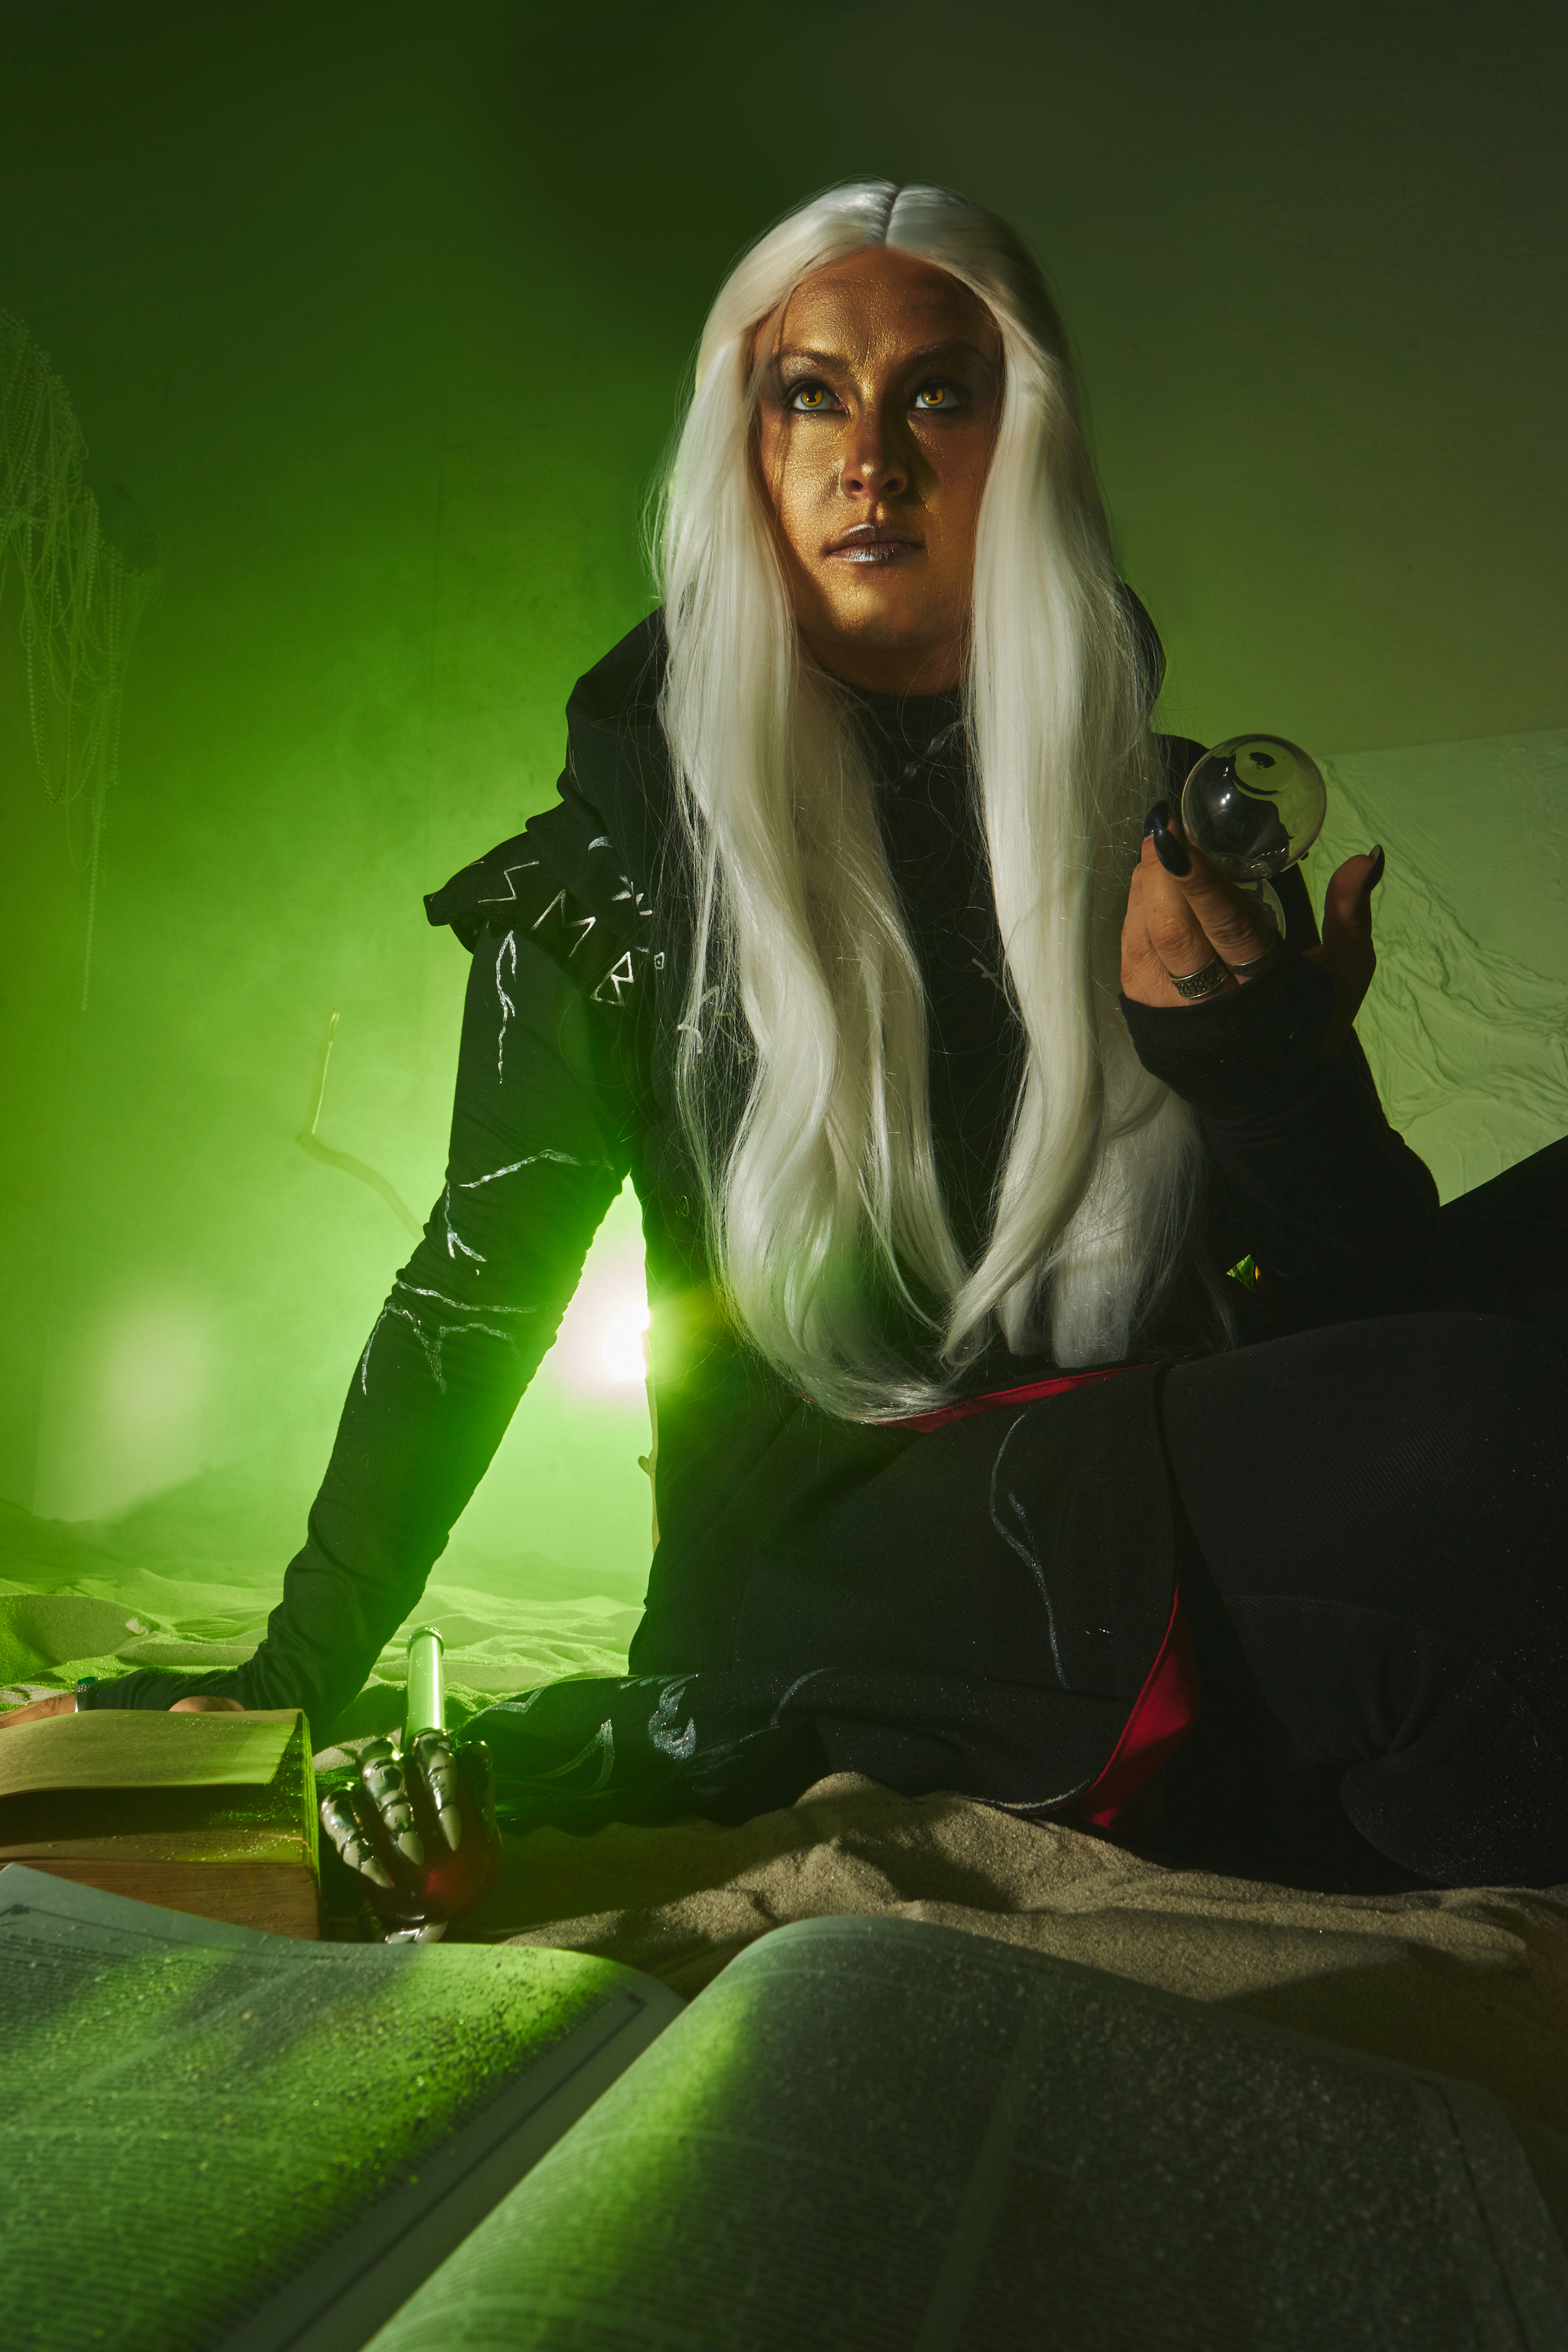 “The greatest magician Raistlin Majere - the most sophisticated sorcerers trembled before this name.” - My, The last test, Raistlin Majere, The Spear Saga, Black Mage, Dragonlance, Cosplay, Longpost, The photo